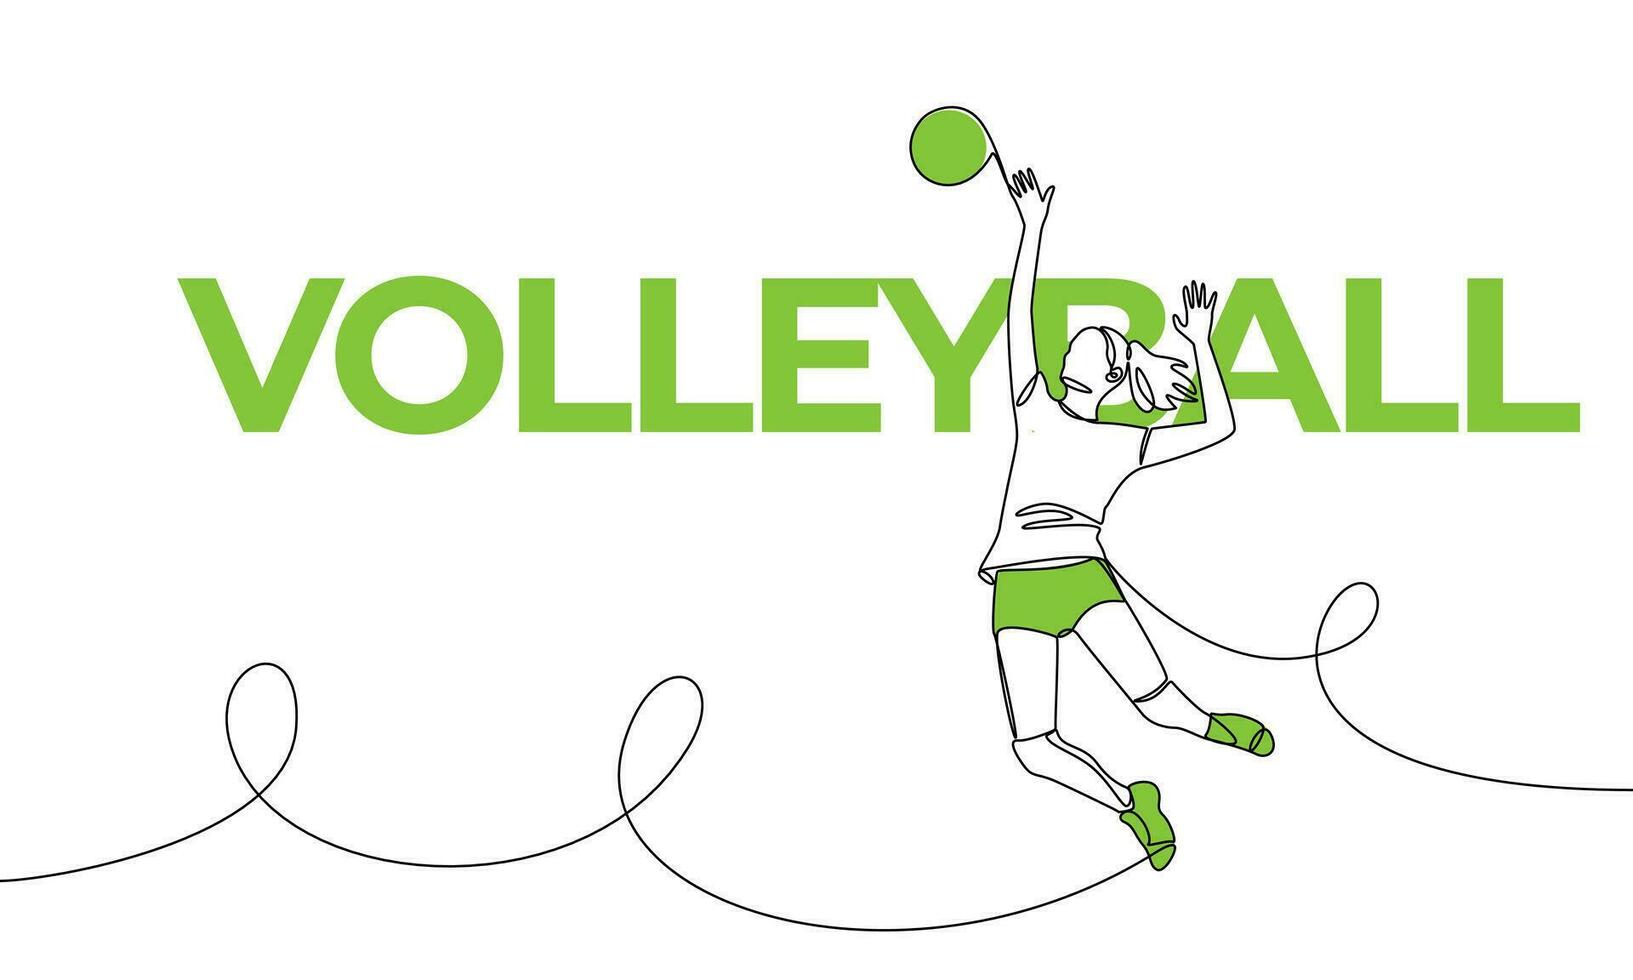 Single continuous drawing of female professional volleyball player. Volleyball, beach volleyball. Colored elements and title. One line vector